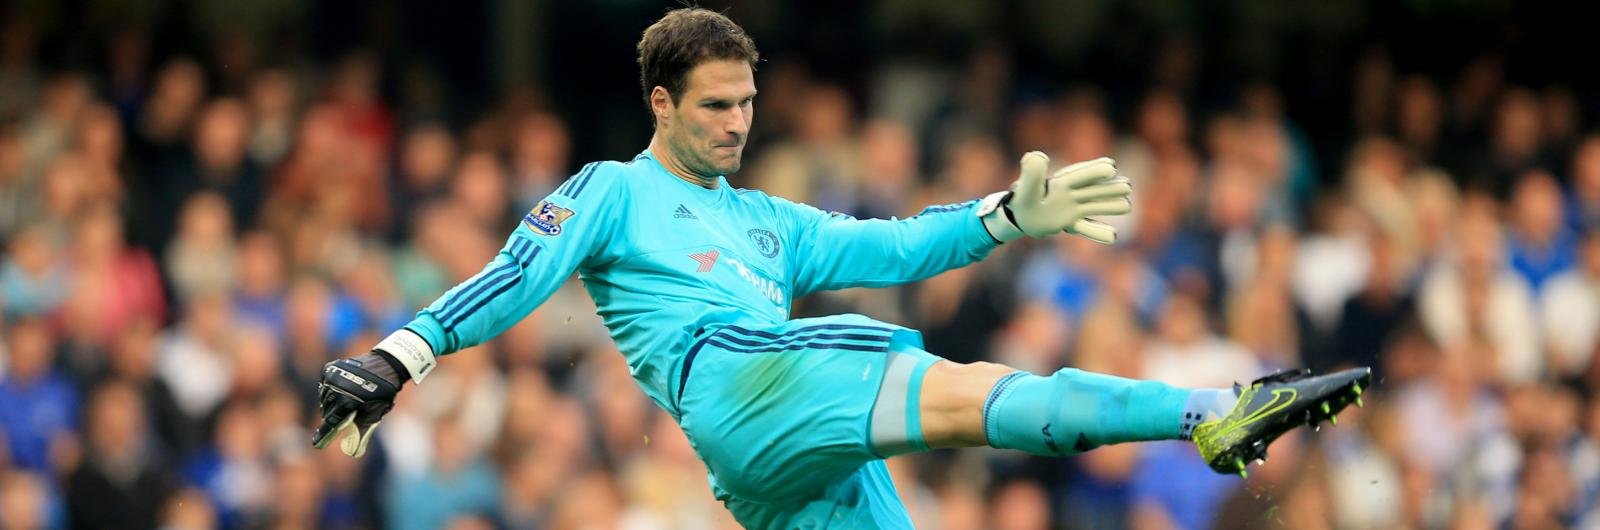 Everton line-up £8m raid on Chelsea’s shot stopper as Tim Howard’s replacement